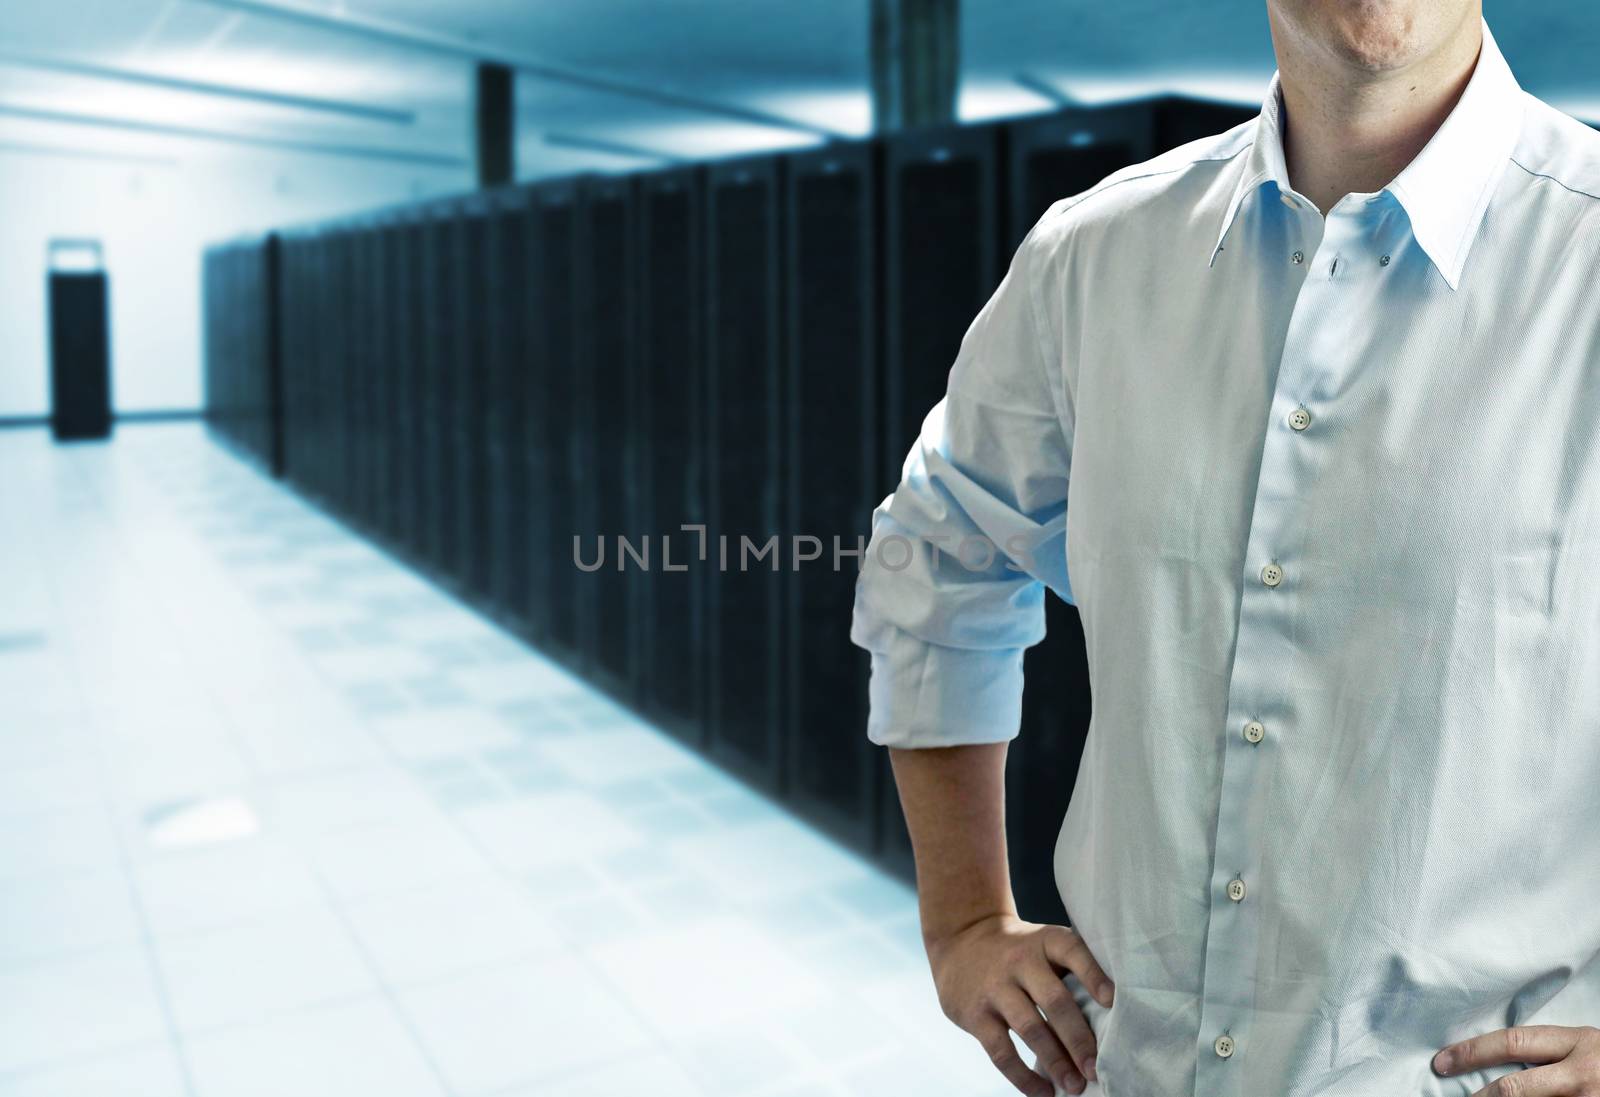 Server room with operating staff in white shirt